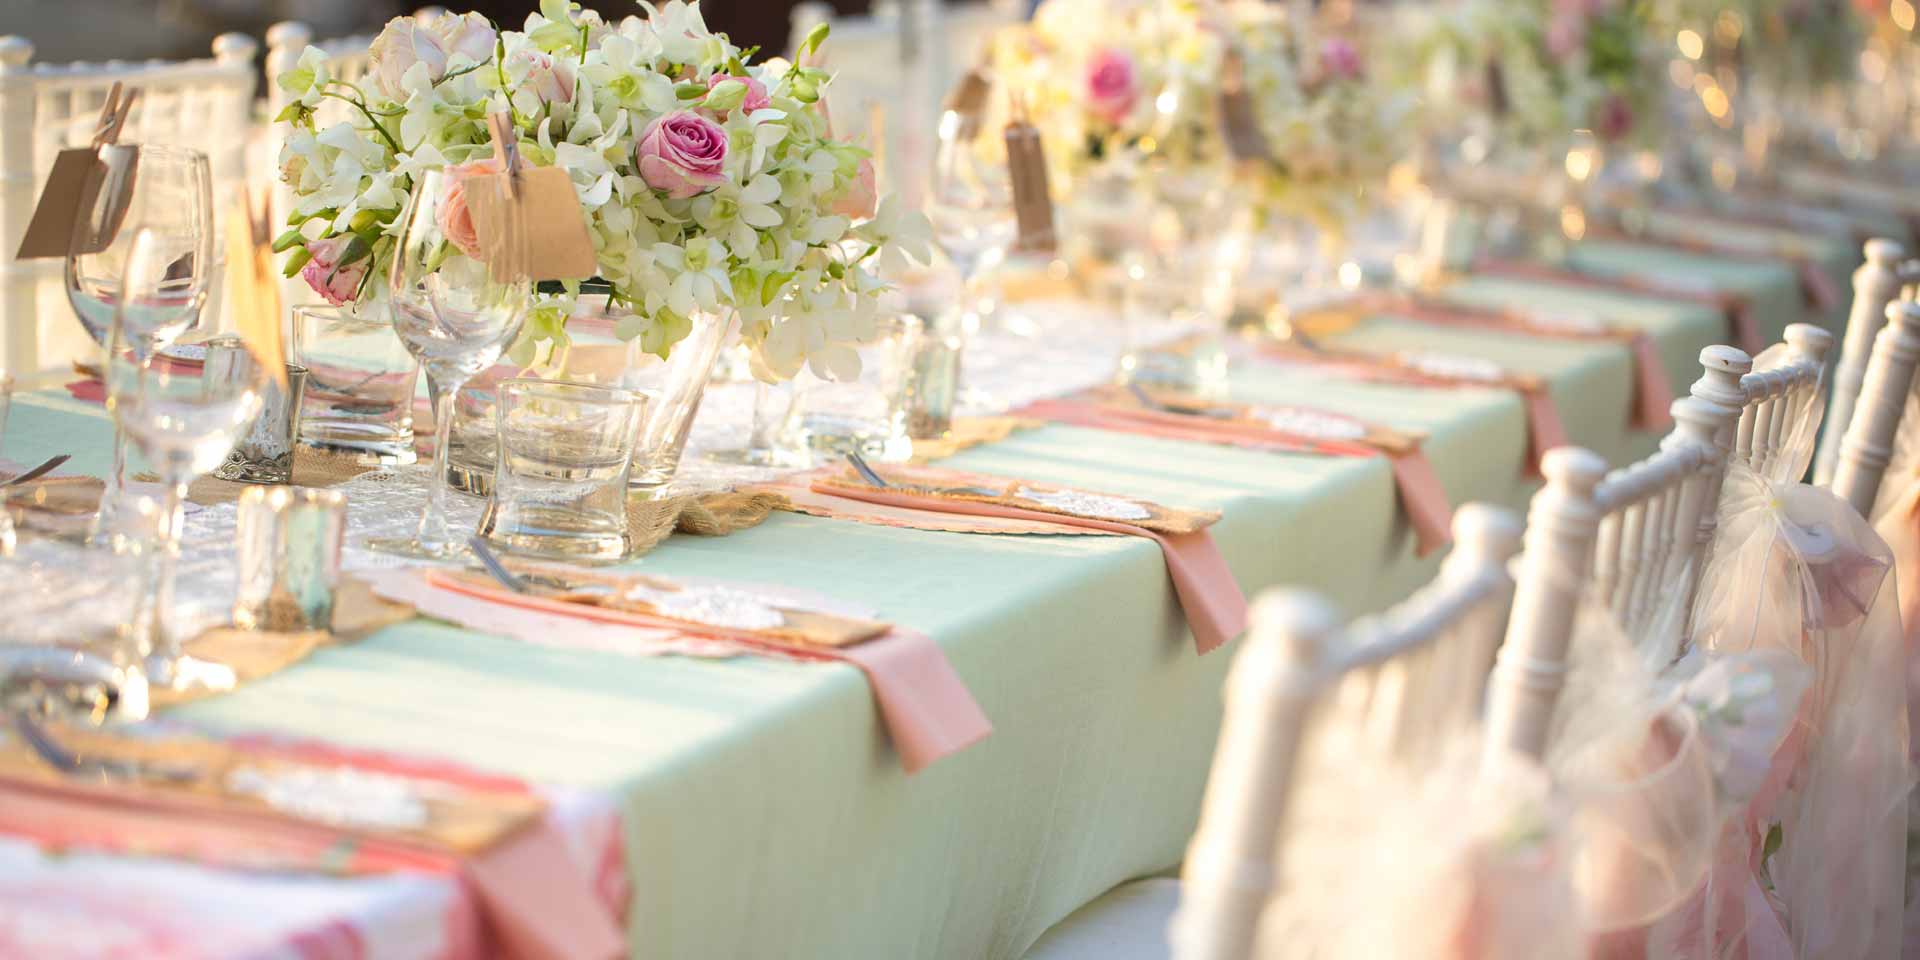 Why Should I Hire a Wedding Planner?